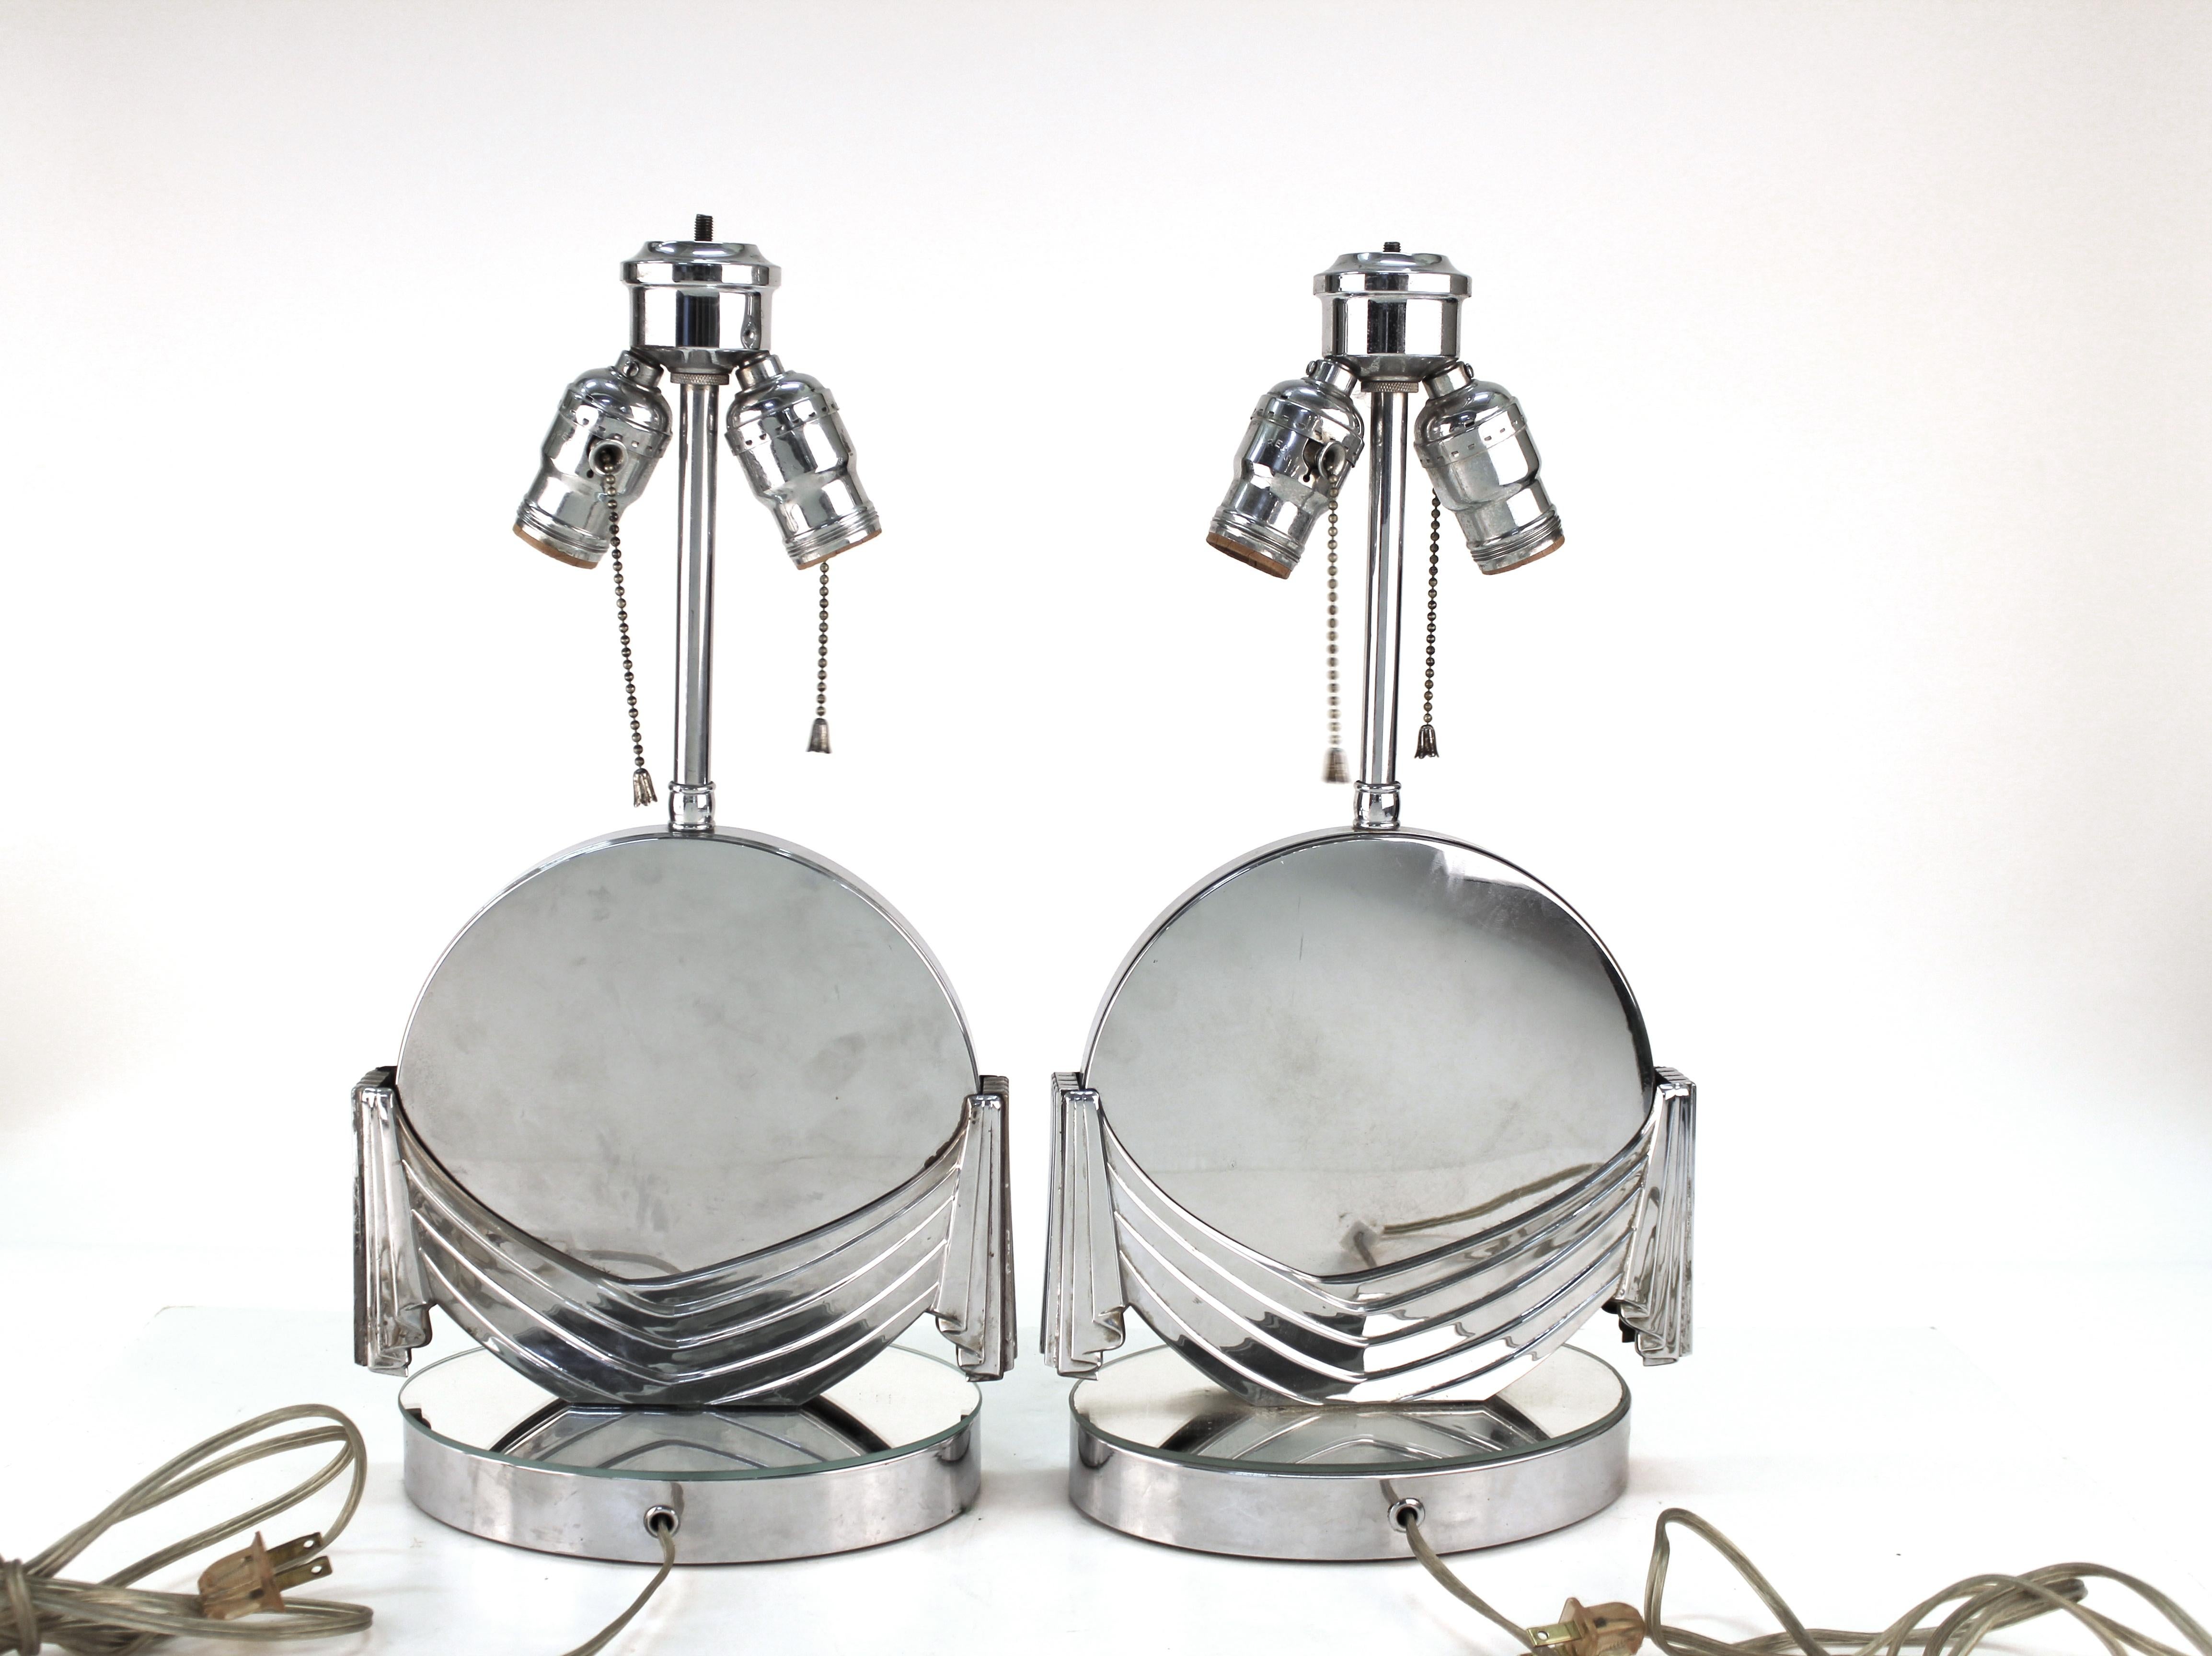 Art Deco table lamps with silver tone mirrored finish. The lamps Stand on circular bases and feature round bodies partially hidden behind stylized 'drapes.' Some wear includes patina, spotting to the metal and surface scratches appropriate to age